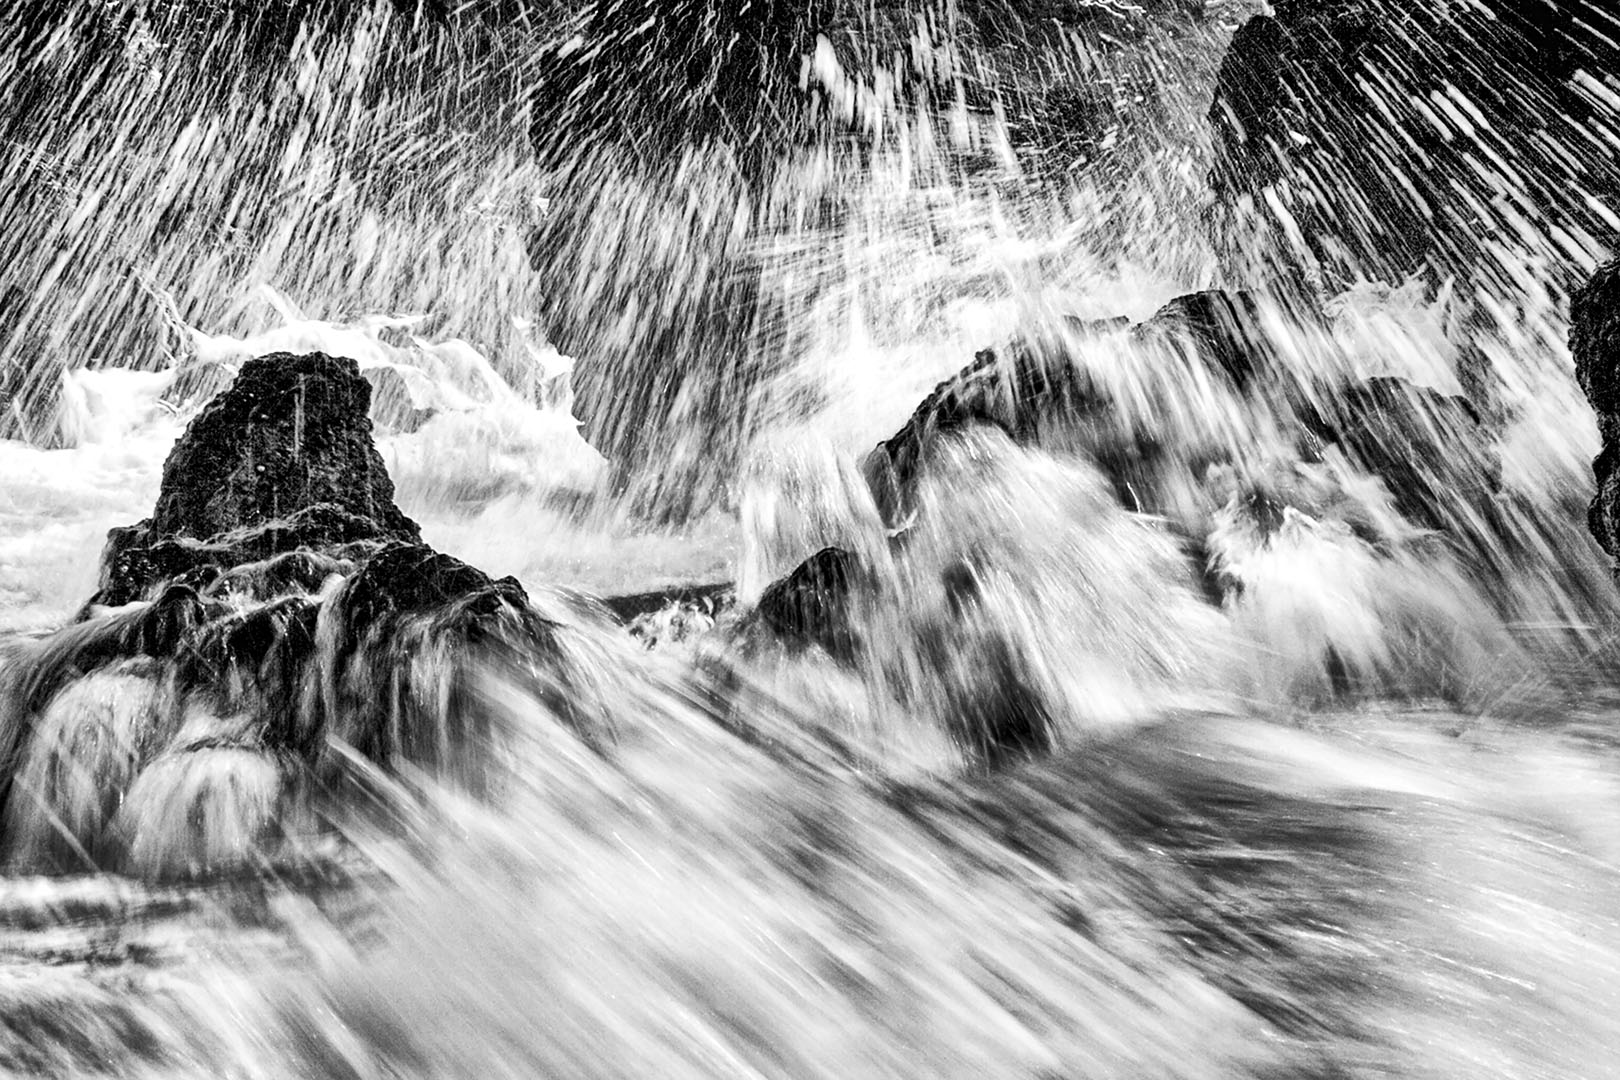 Holly Gordon, Water Music #4988, 2012. Archival pigment print on paper, 28x18.6, (31x21 framed)